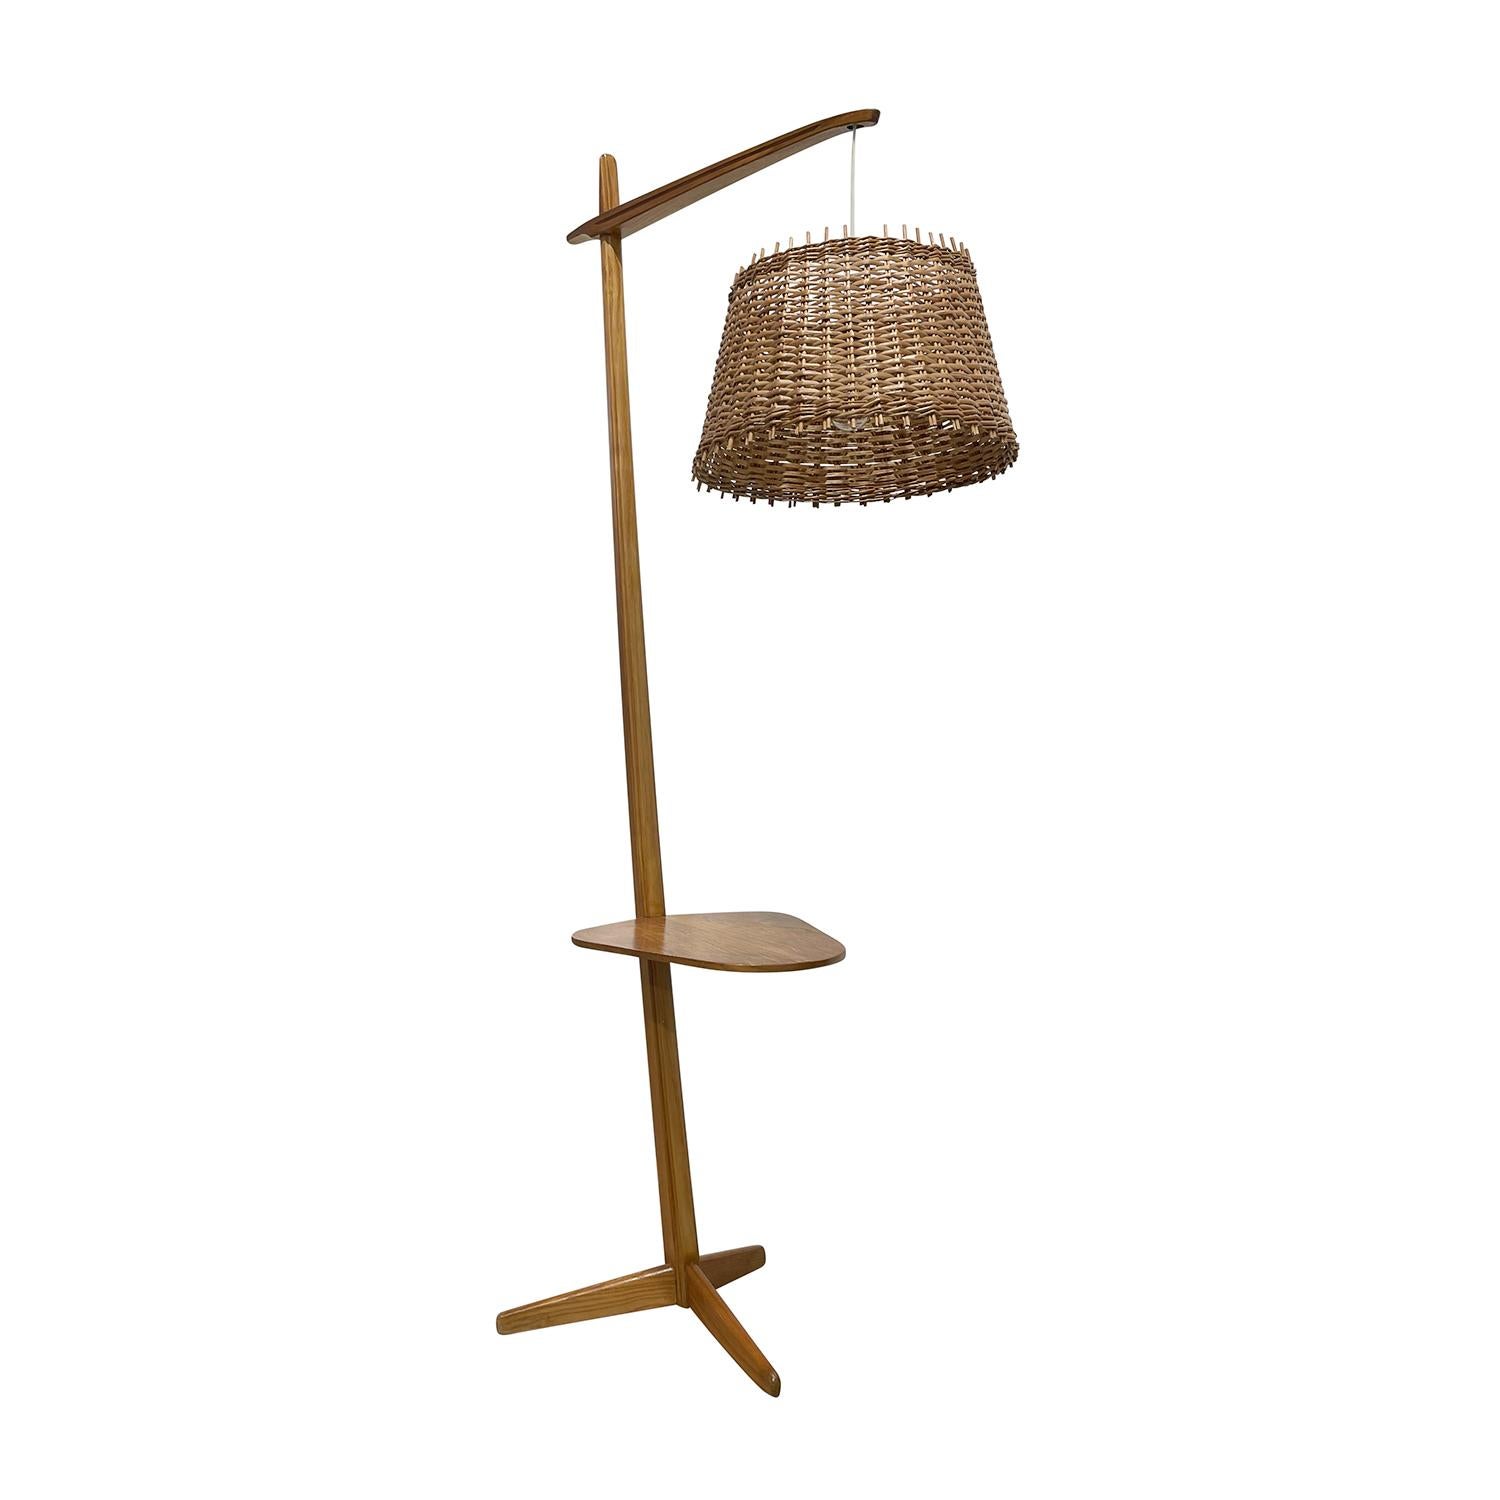 A light-brown, vintage Mid-Century Modern Czech reading floor lamp with an arched shelf, made of handcrafted Oakwood, designed and produced by Krasna Jizba in good condition. The detailed light is composed with its original round bamboo shade,